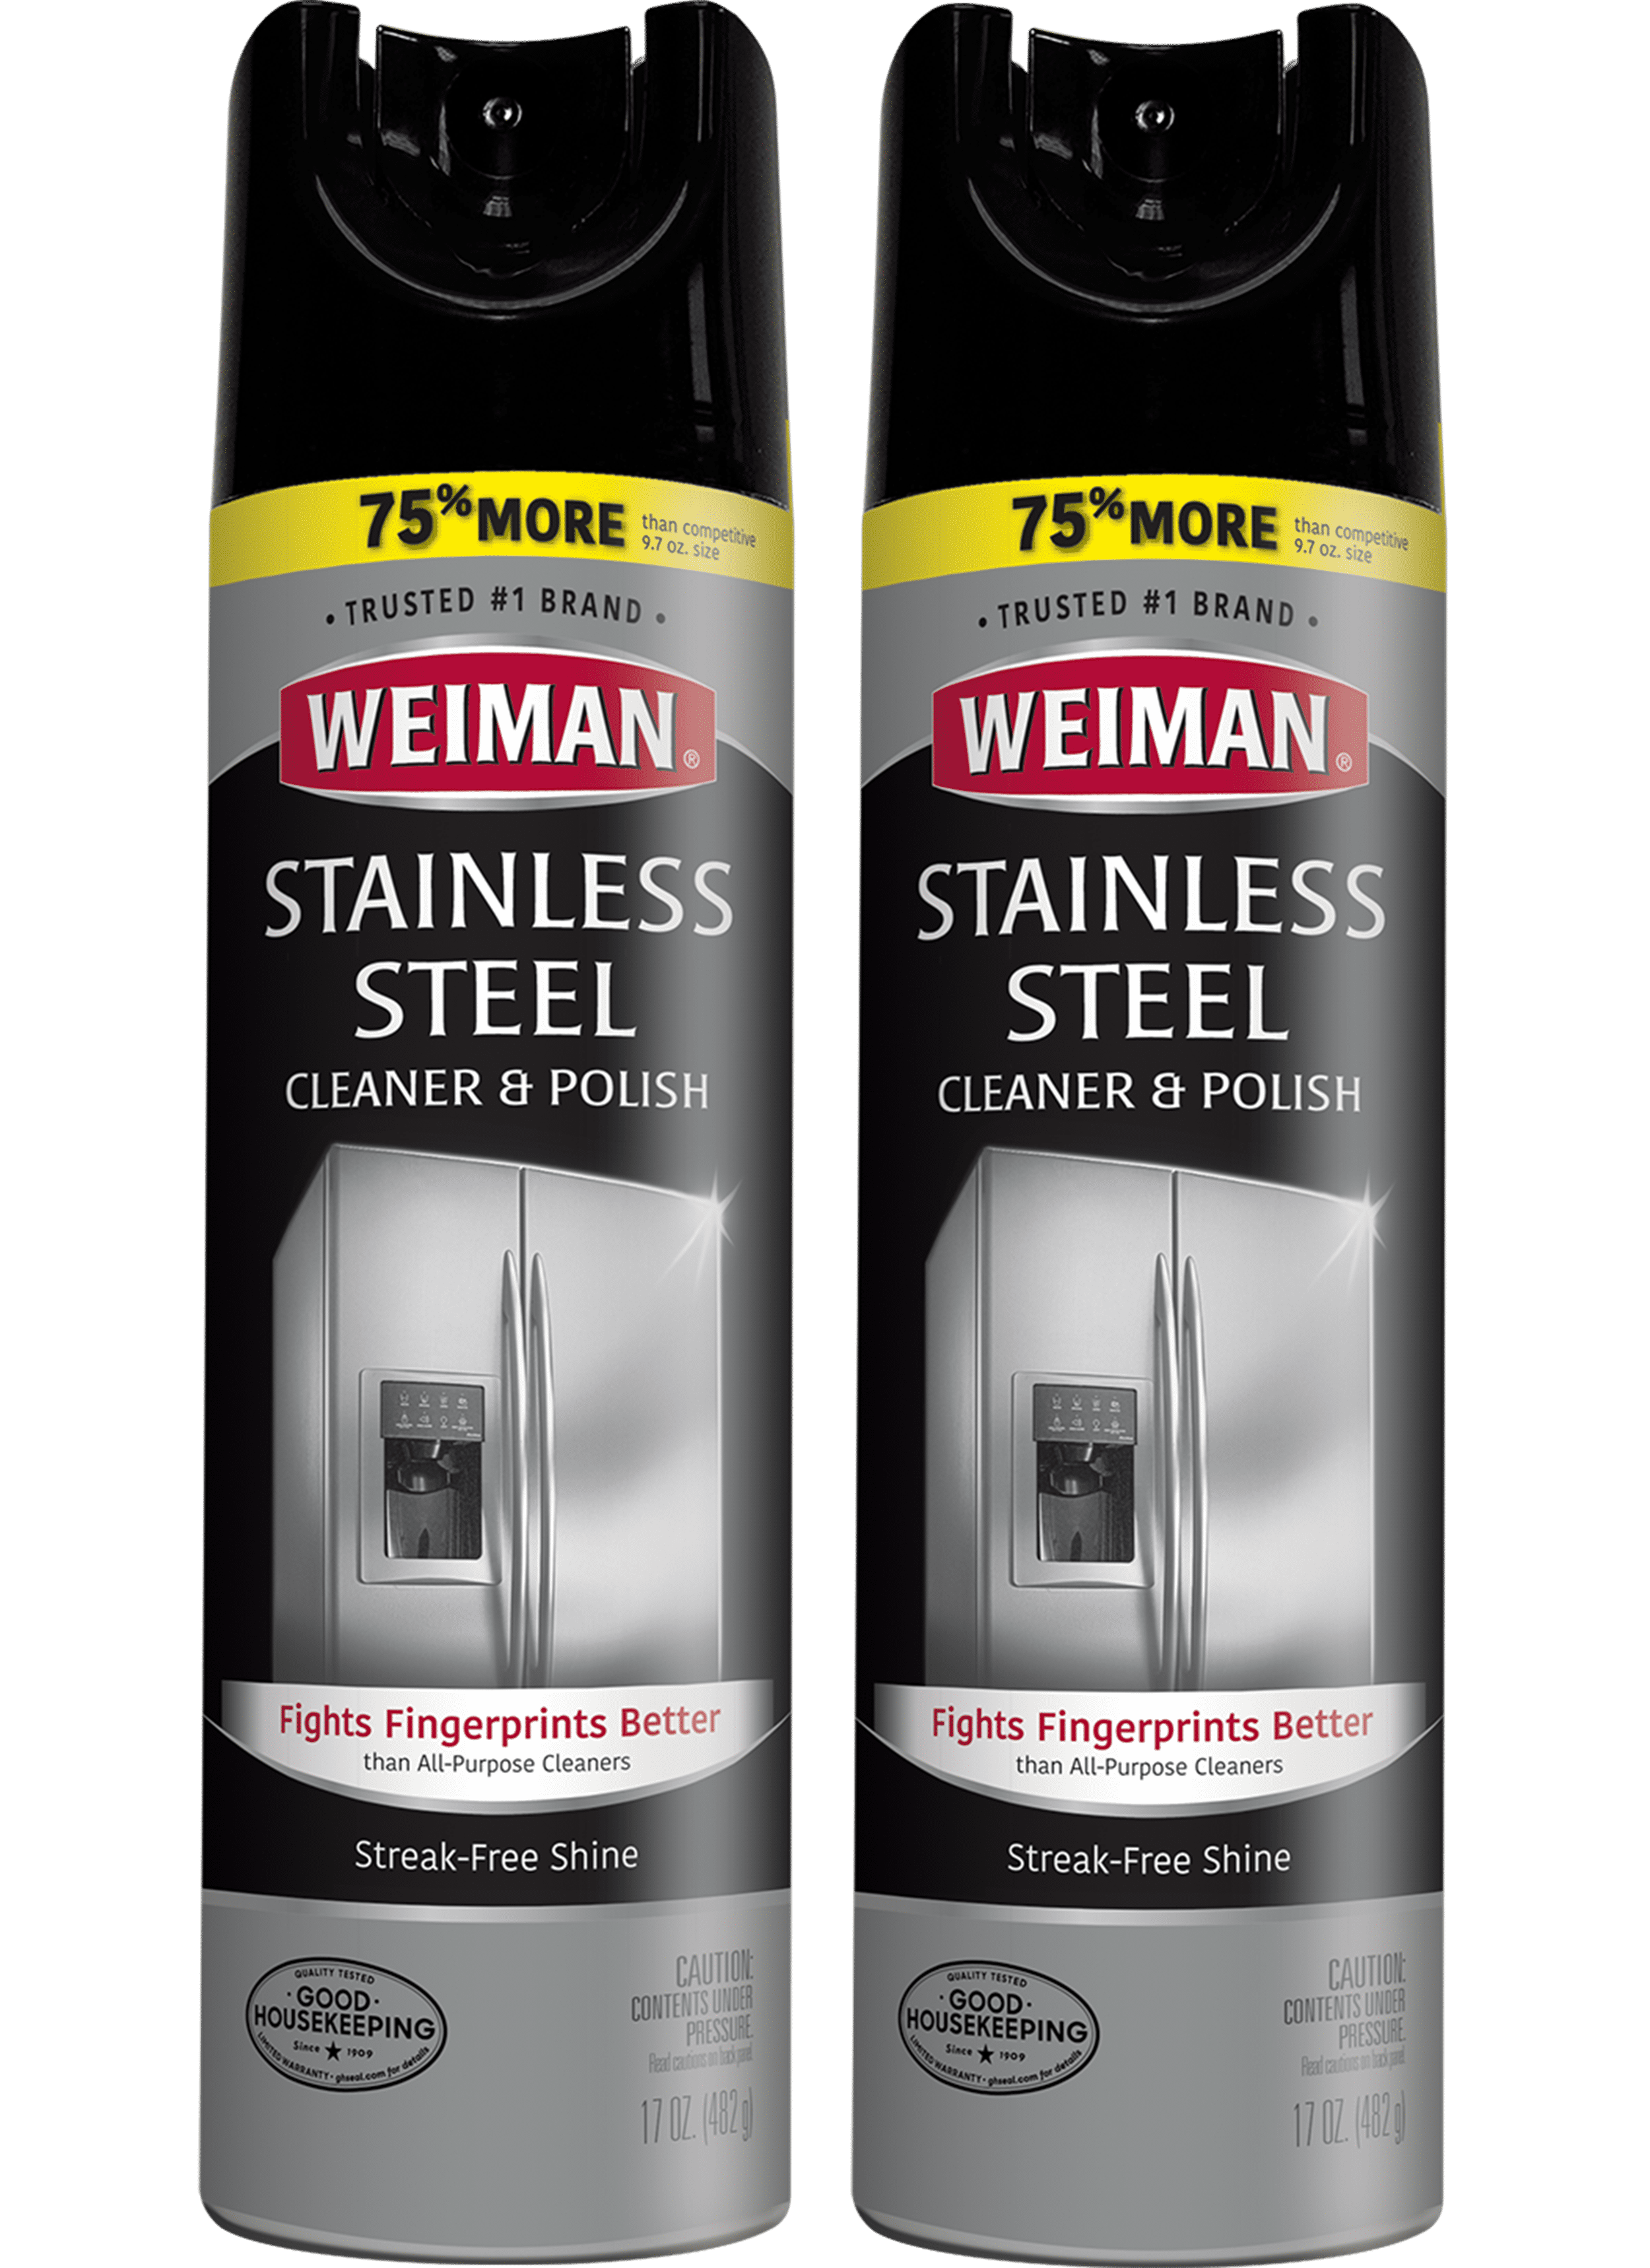 Weiman Stainless Steel Cleaner and Polish 17 fl oz (2 Pack)